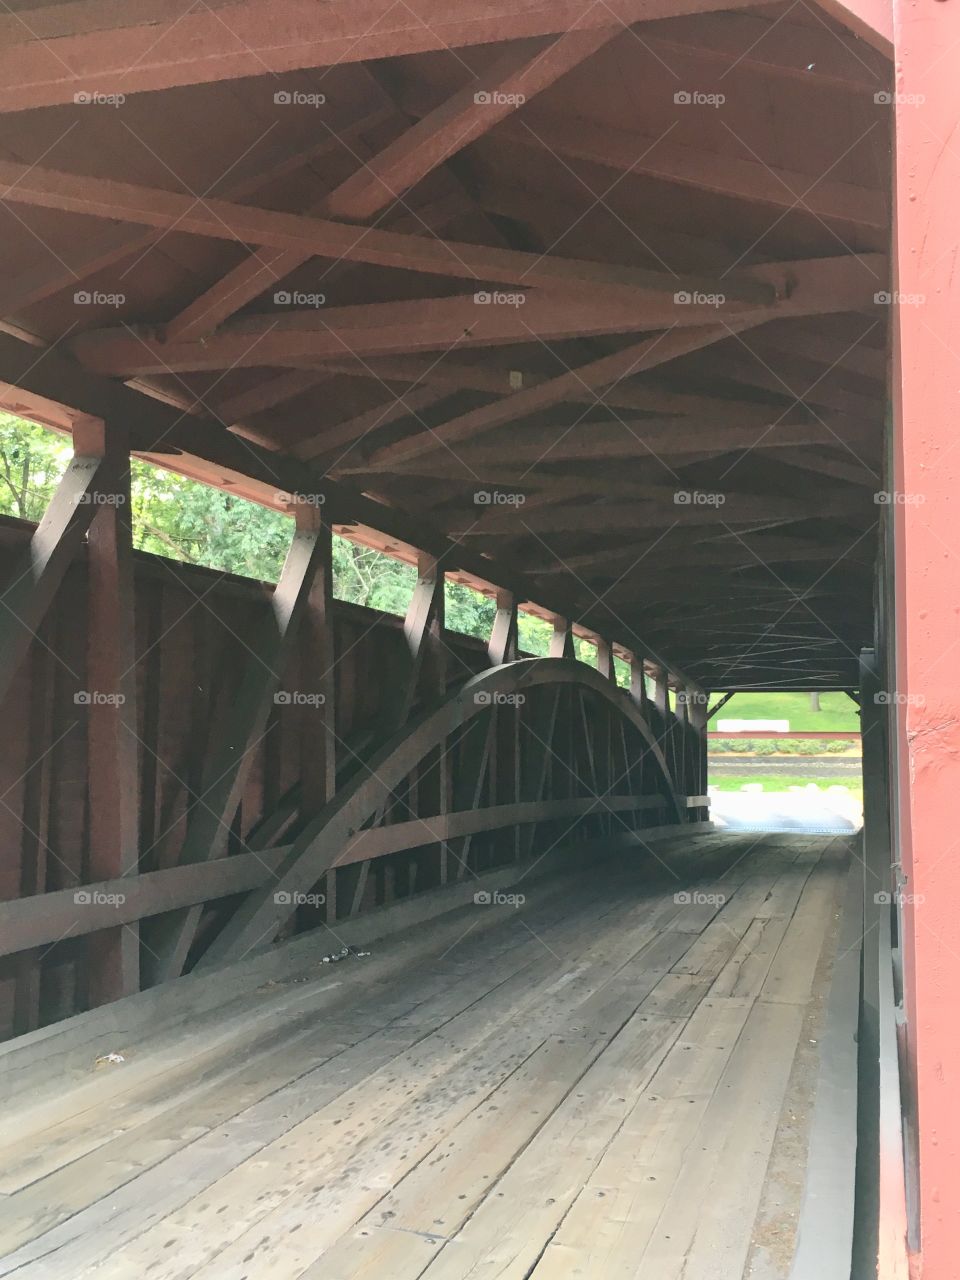 Inside view of covered bridge